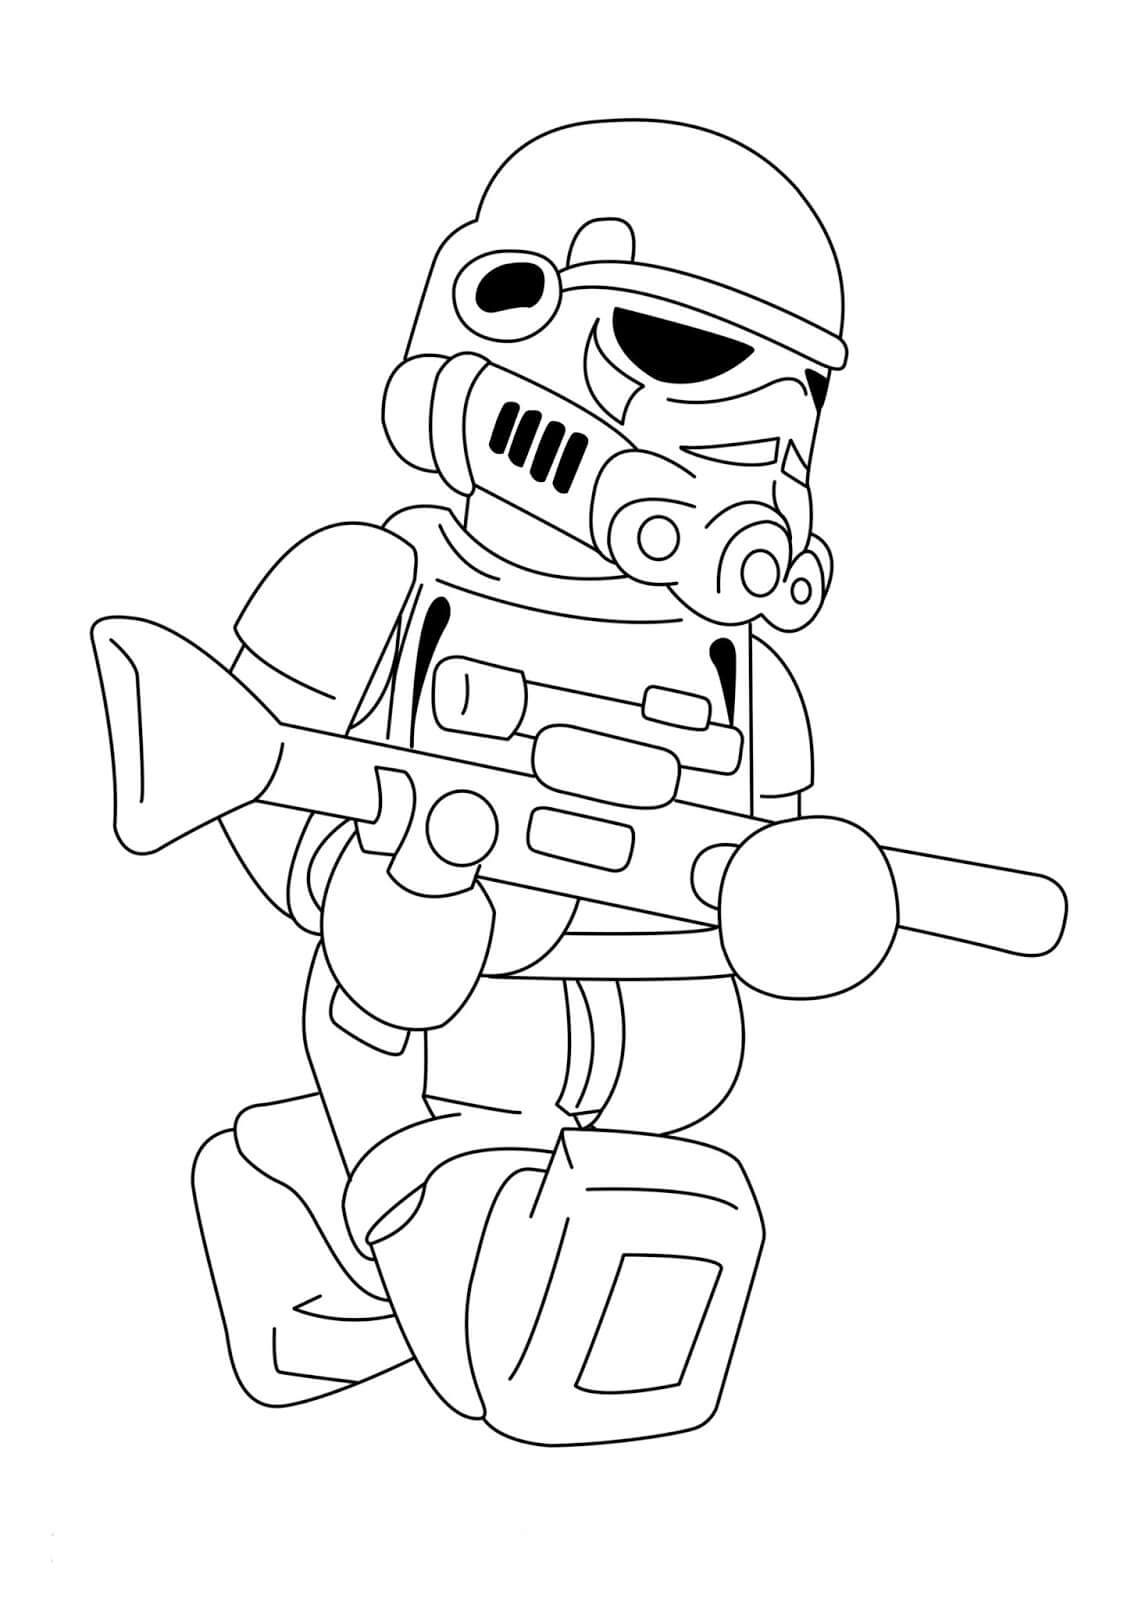 Lego Star Wars Stormtrooper Coloring Page